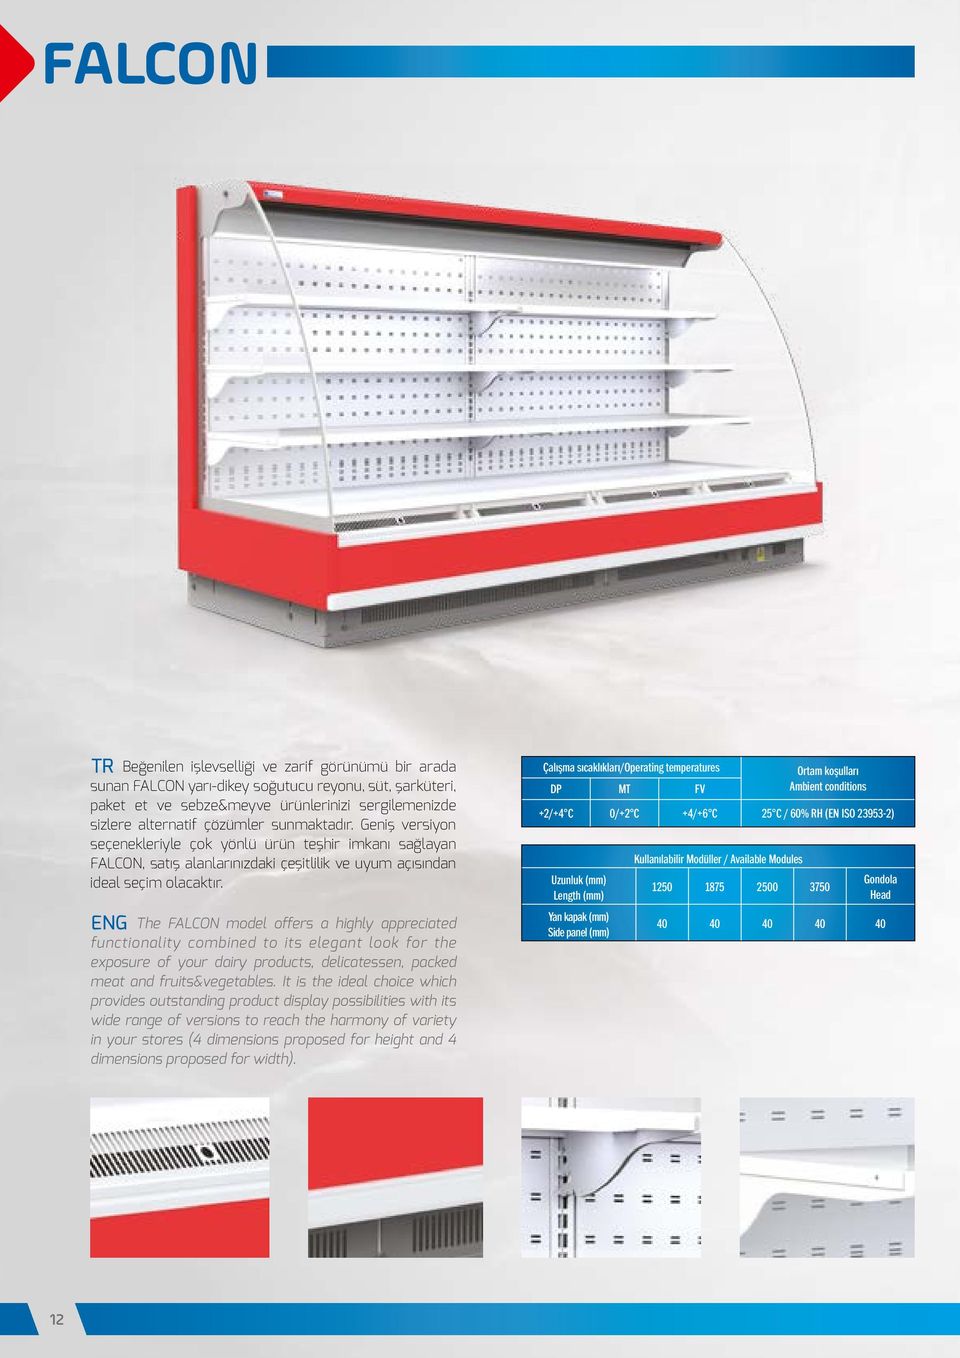 ENG The FALCON model offers a highly appreciated functionality combined to its elegant look for the exposure of your dairy products, delicatessen, packed meat and fruits&vegetables.